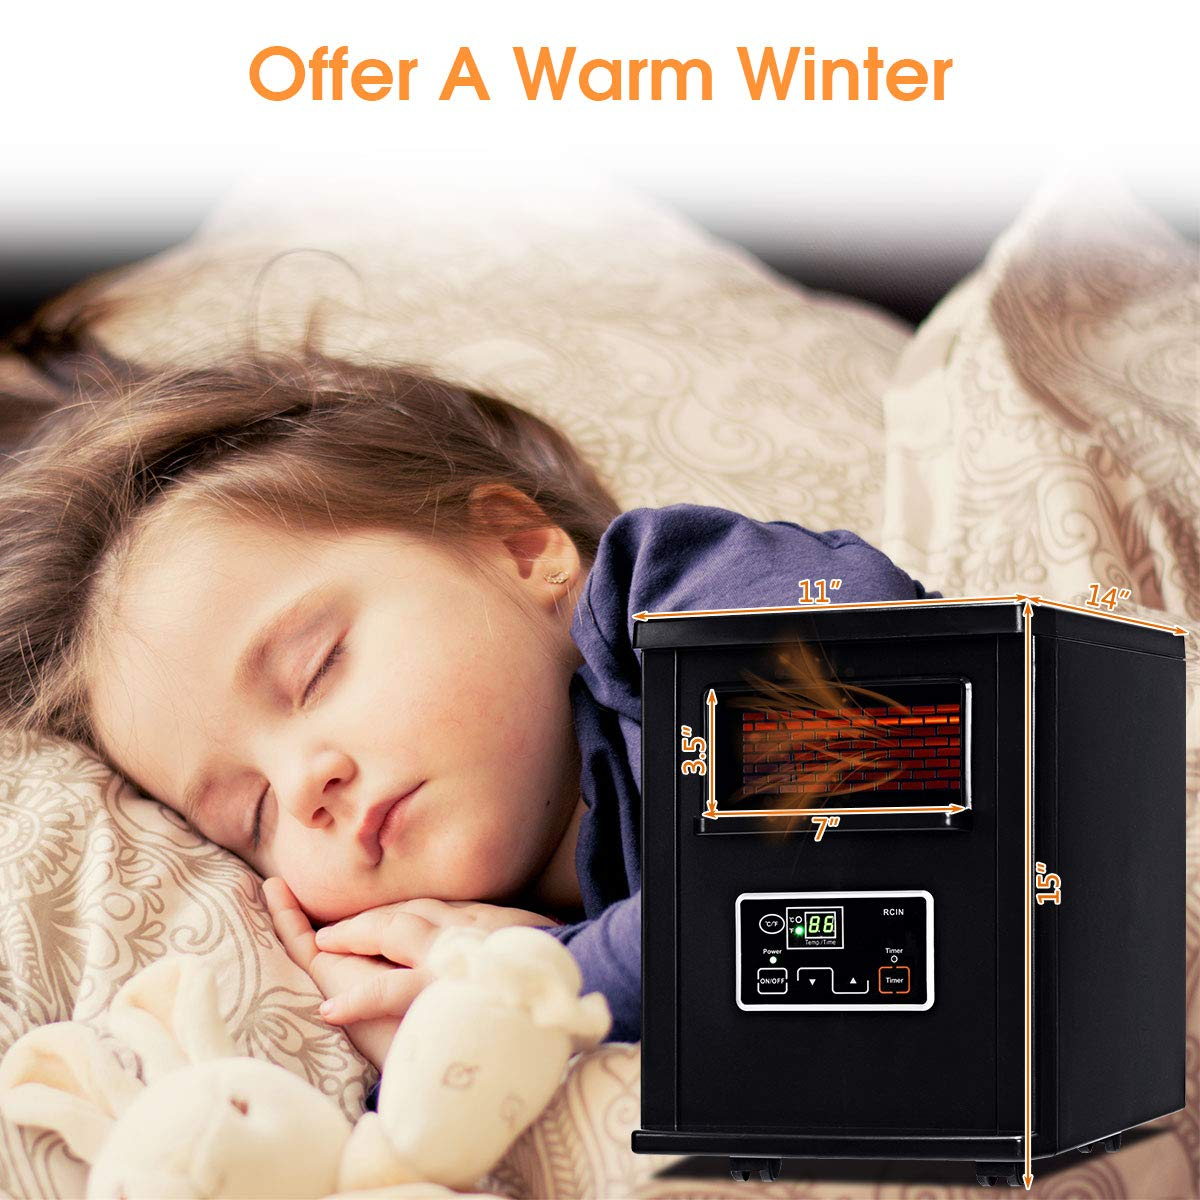 Giantex Infrared Space Heater, 1500W Portable Quartz Mini Electric Heater with Digital Thermostat